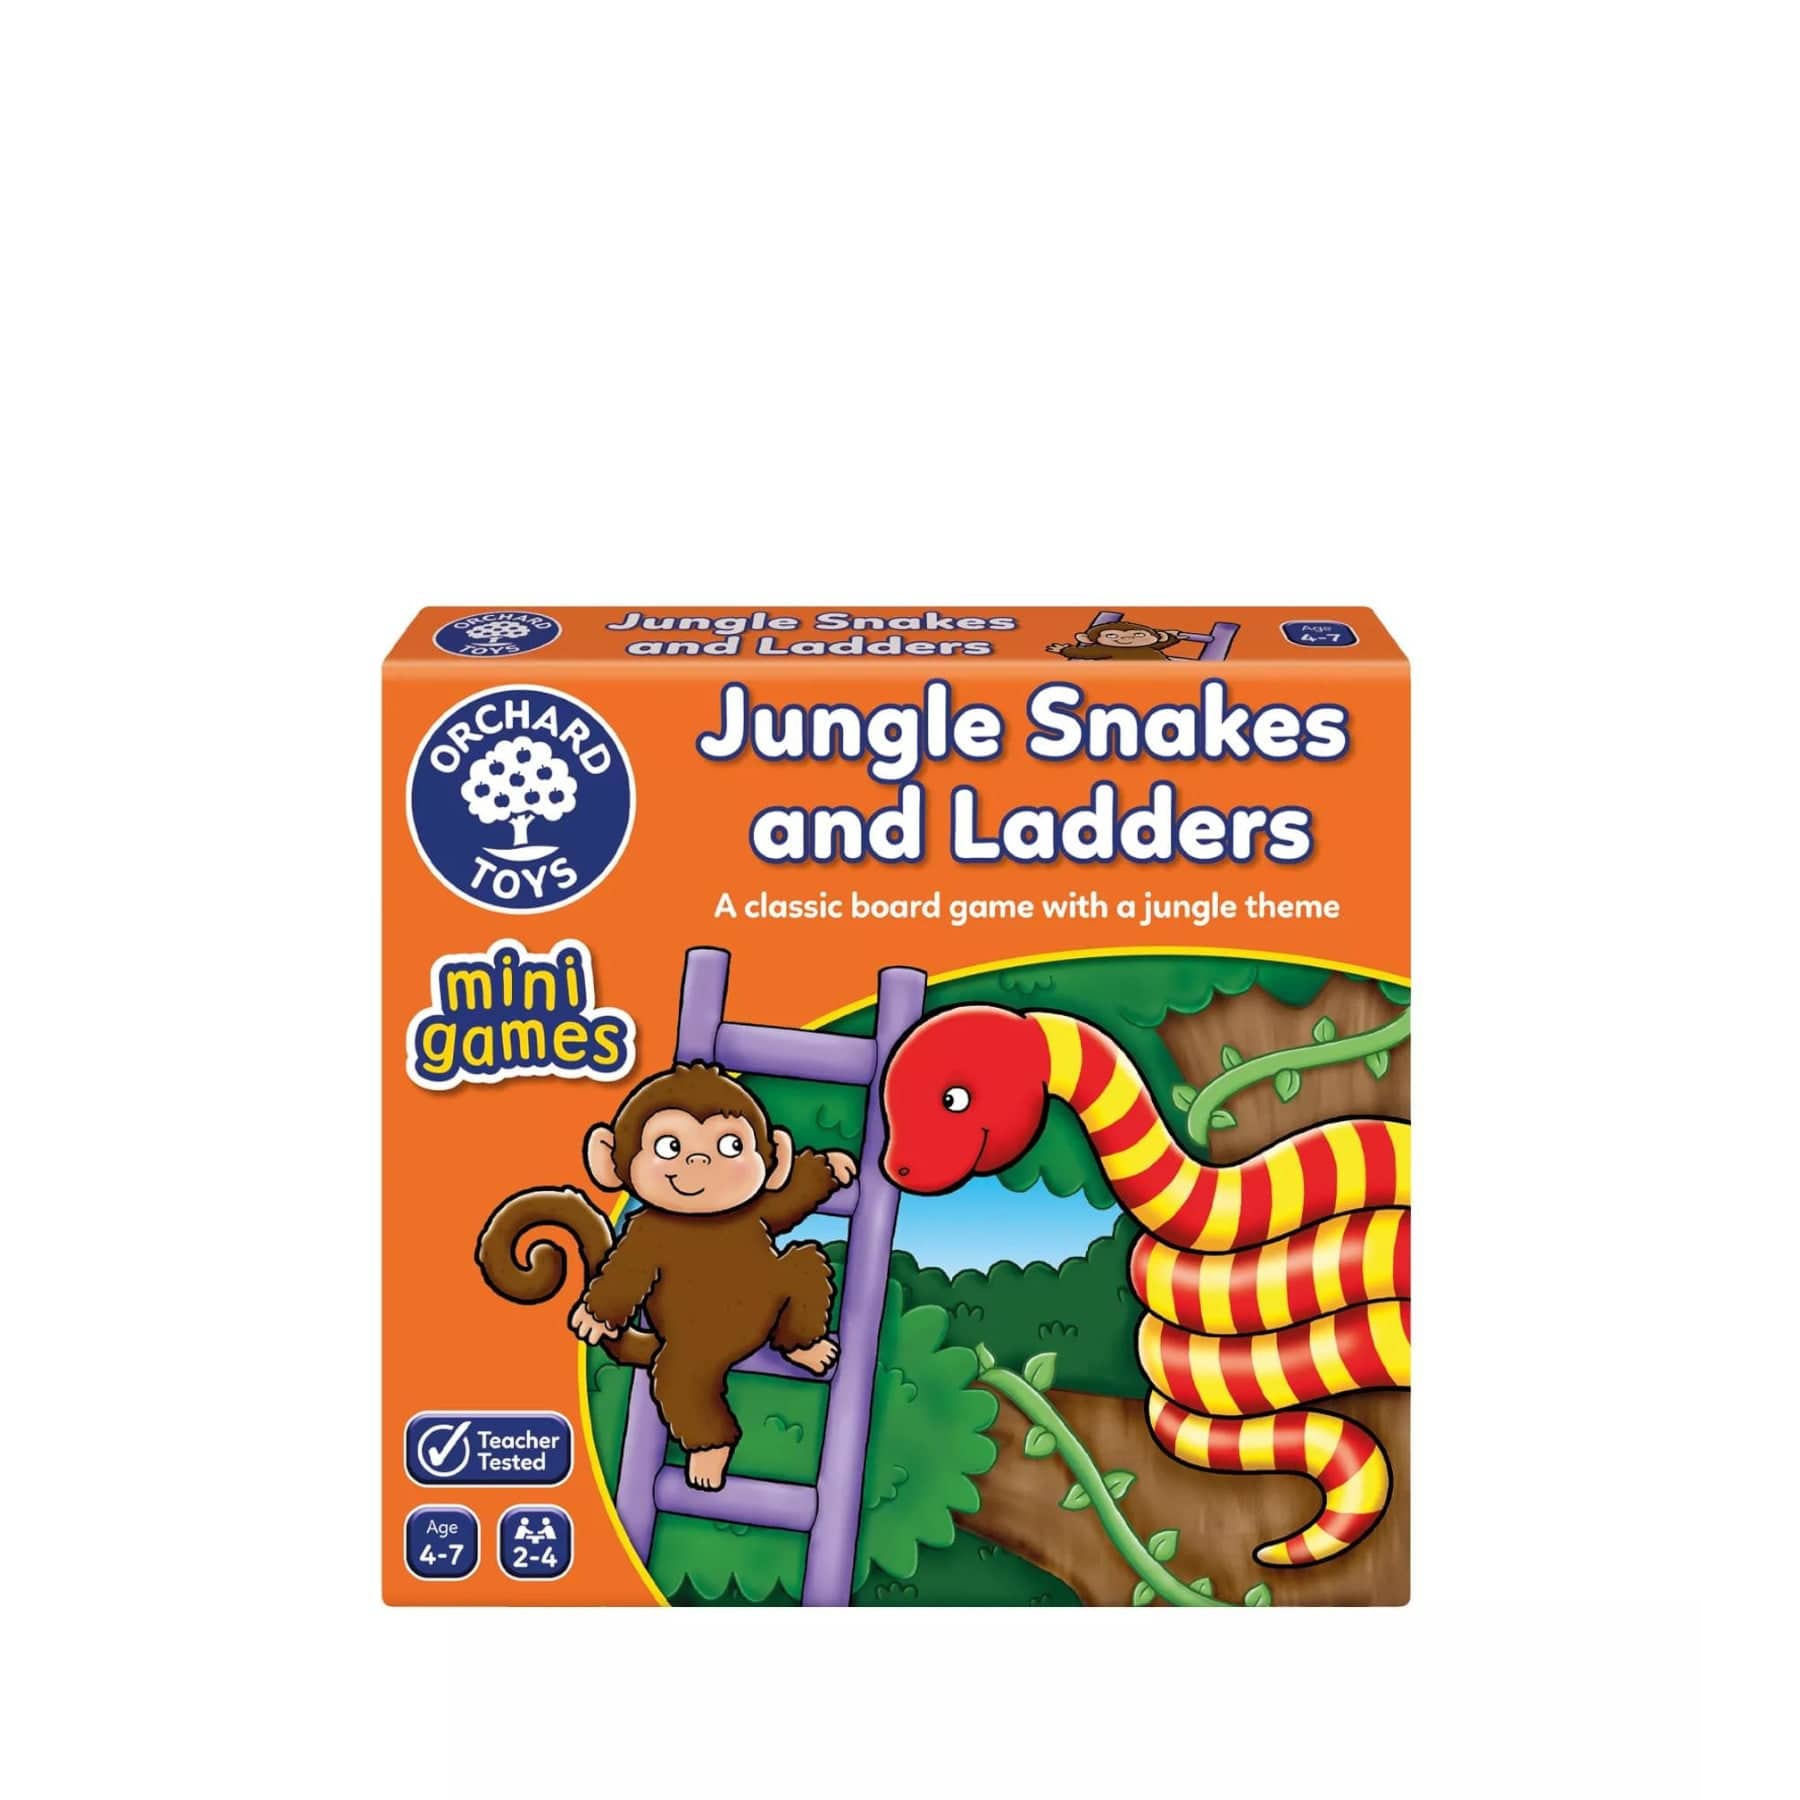 Orchard Toys Jungle Snakes and Ladders board game box featuring colorful cartoon monkey and snakes, children's educational game, ages 4-7, mini games series, teacher tested